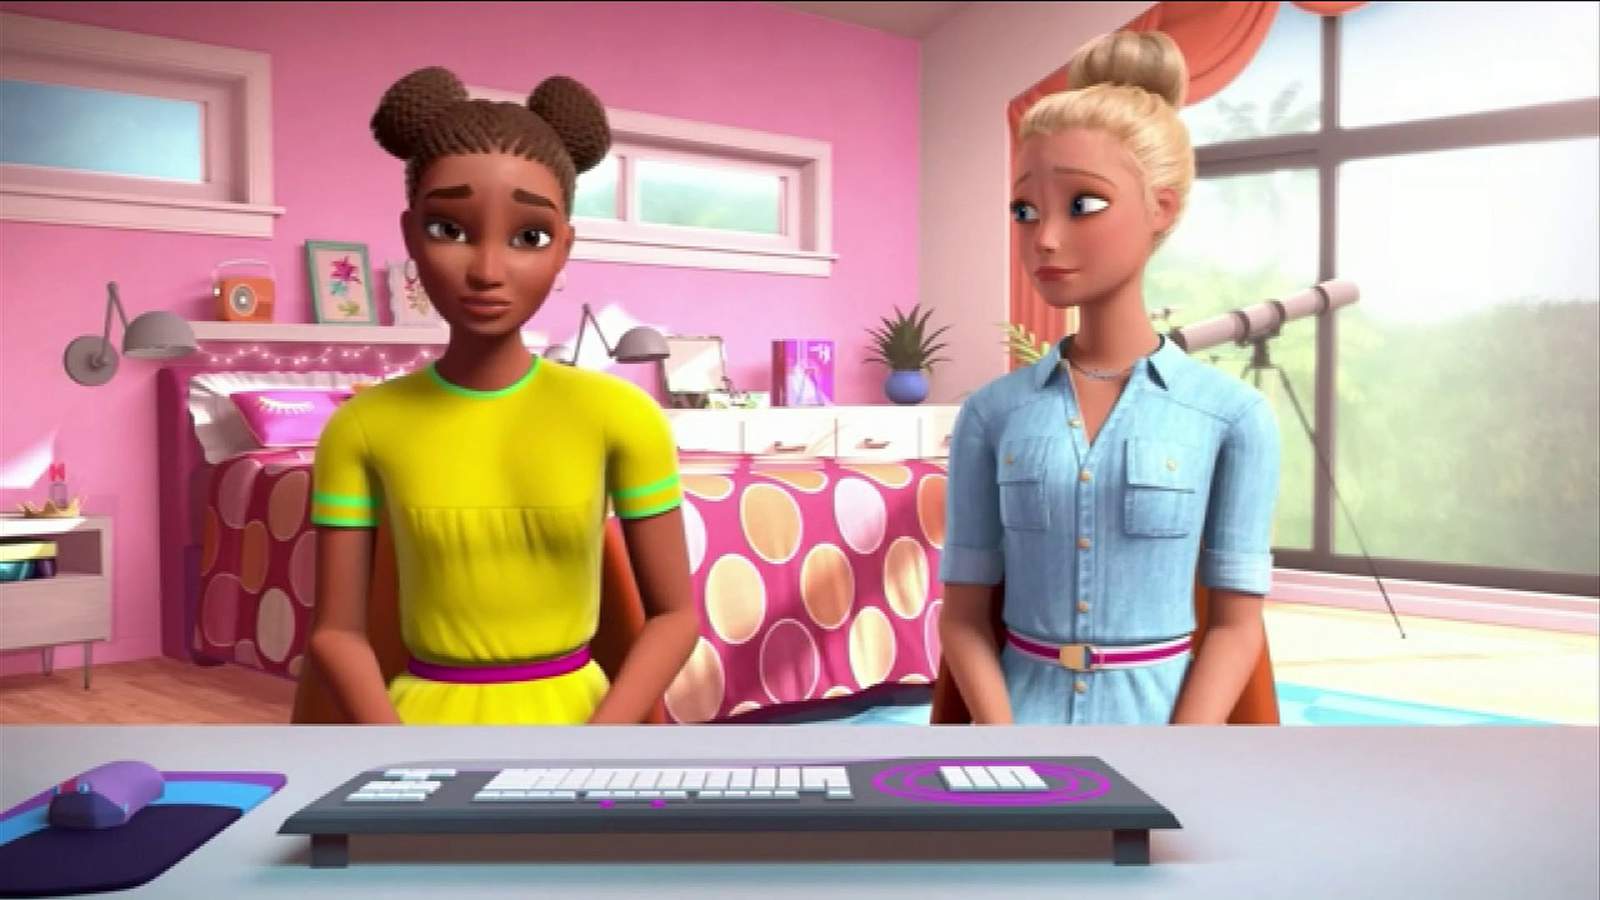 Barbie takes on racism in new video released by toy company